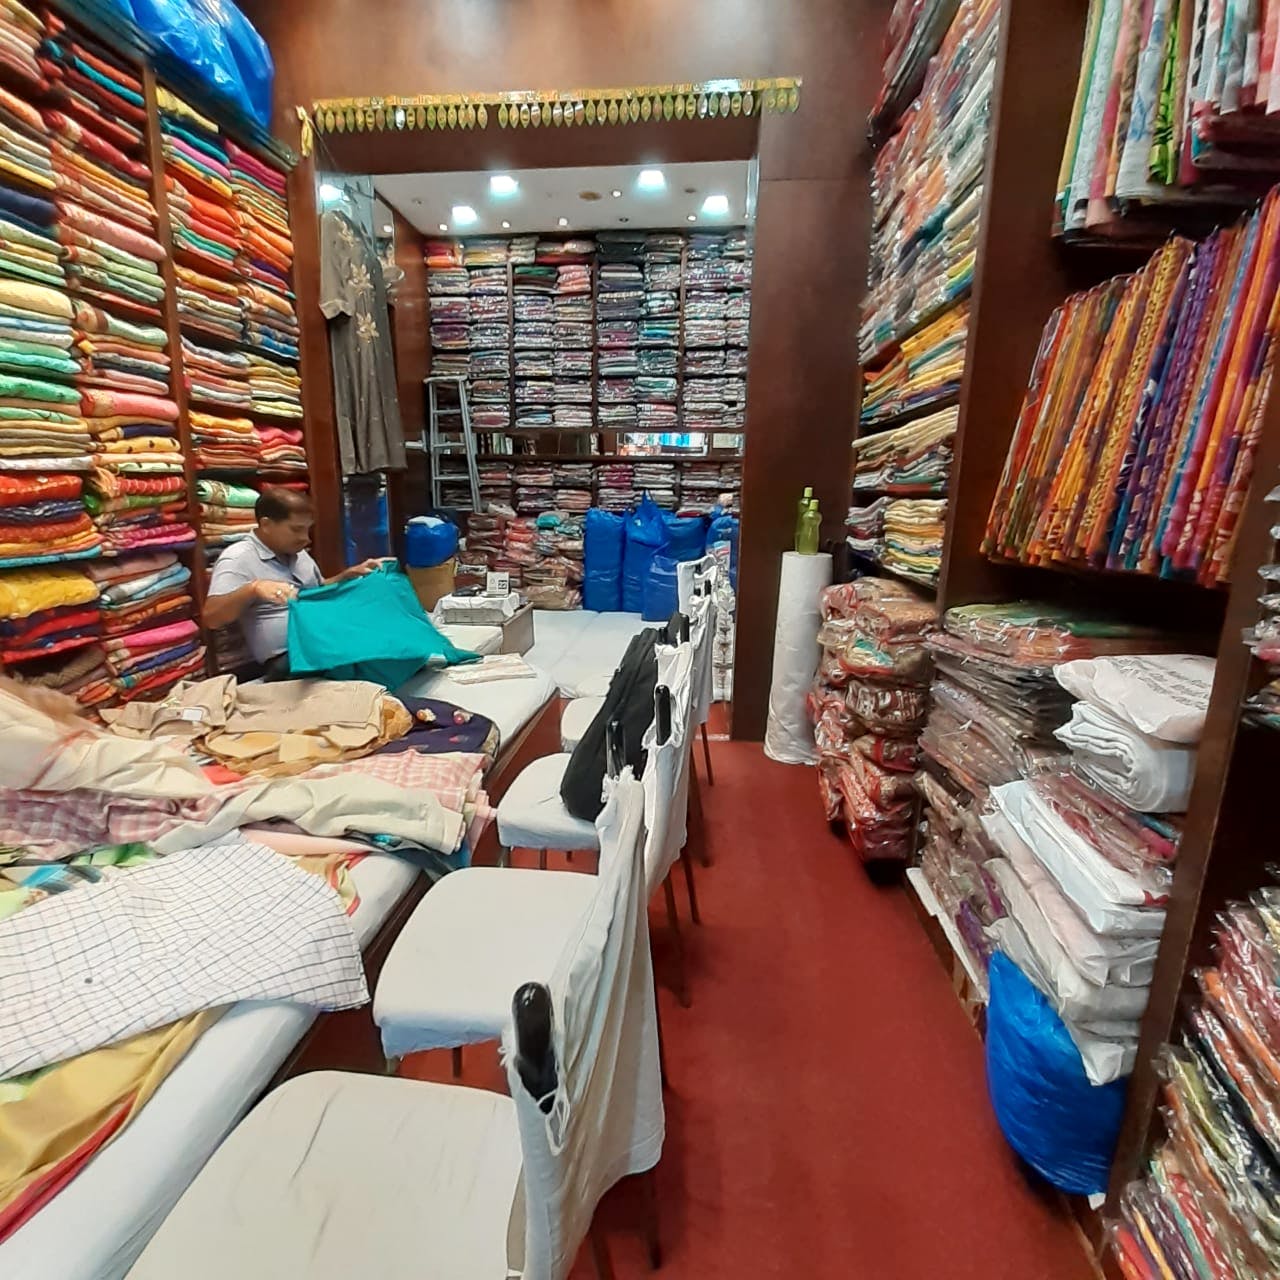 20 Famous Saree shop in Patna Bihar for any occasion best saree shops list  2022 Famous Saree Shop in Patna | Famous Saree Shops in Patna: ये हैं पटना  के 20 फेमस